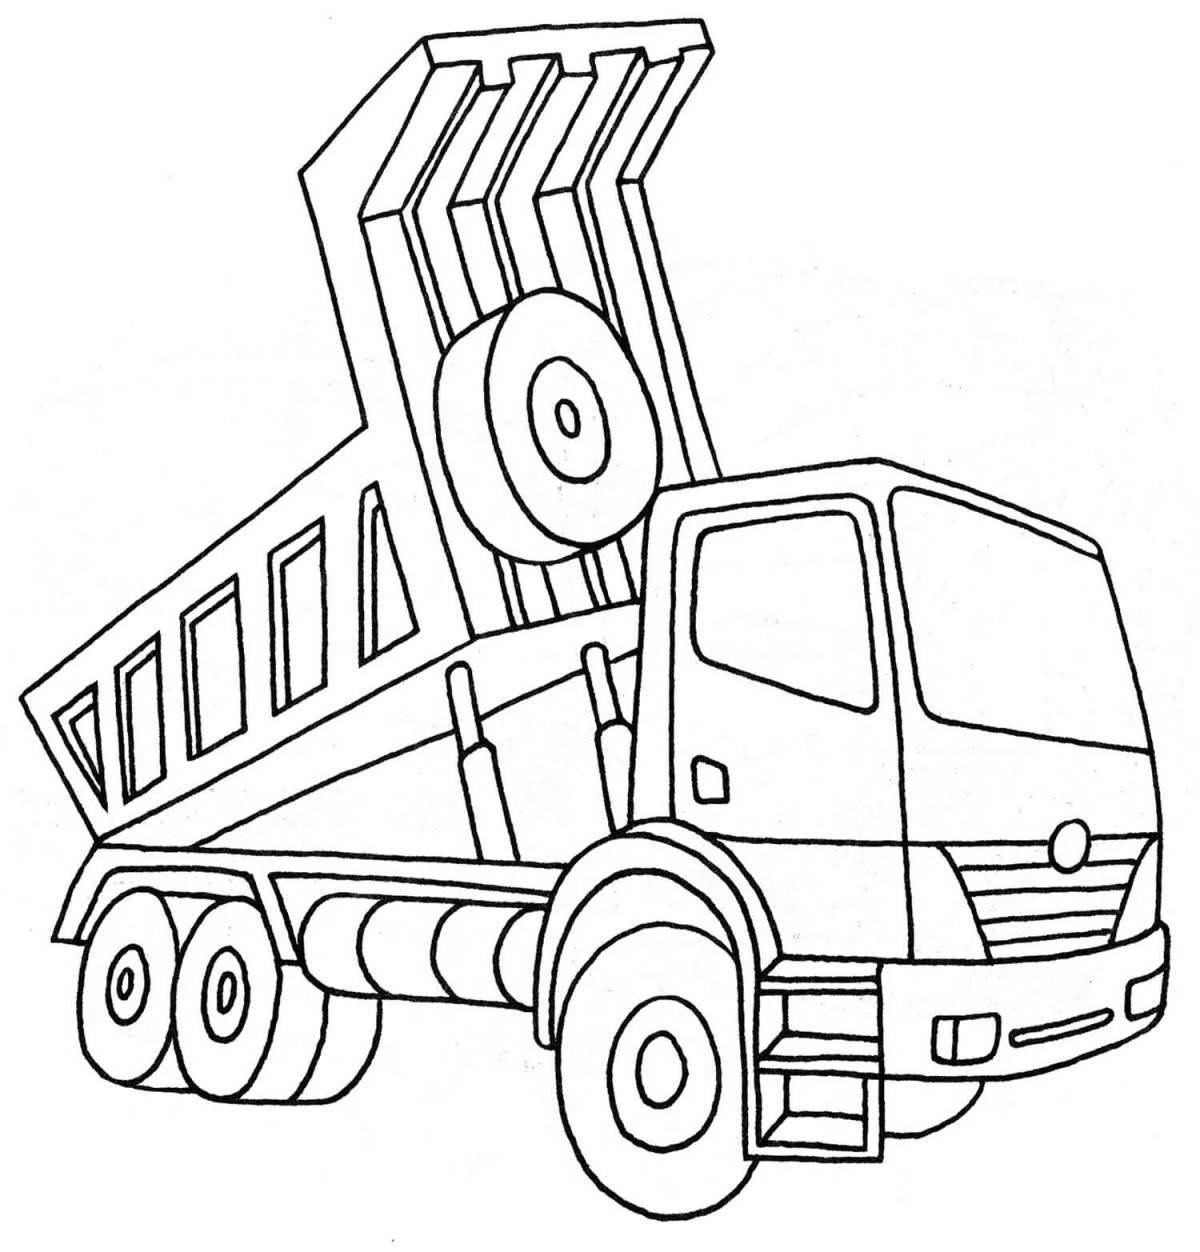 Construction machinery coloring page for 6-7 year olds